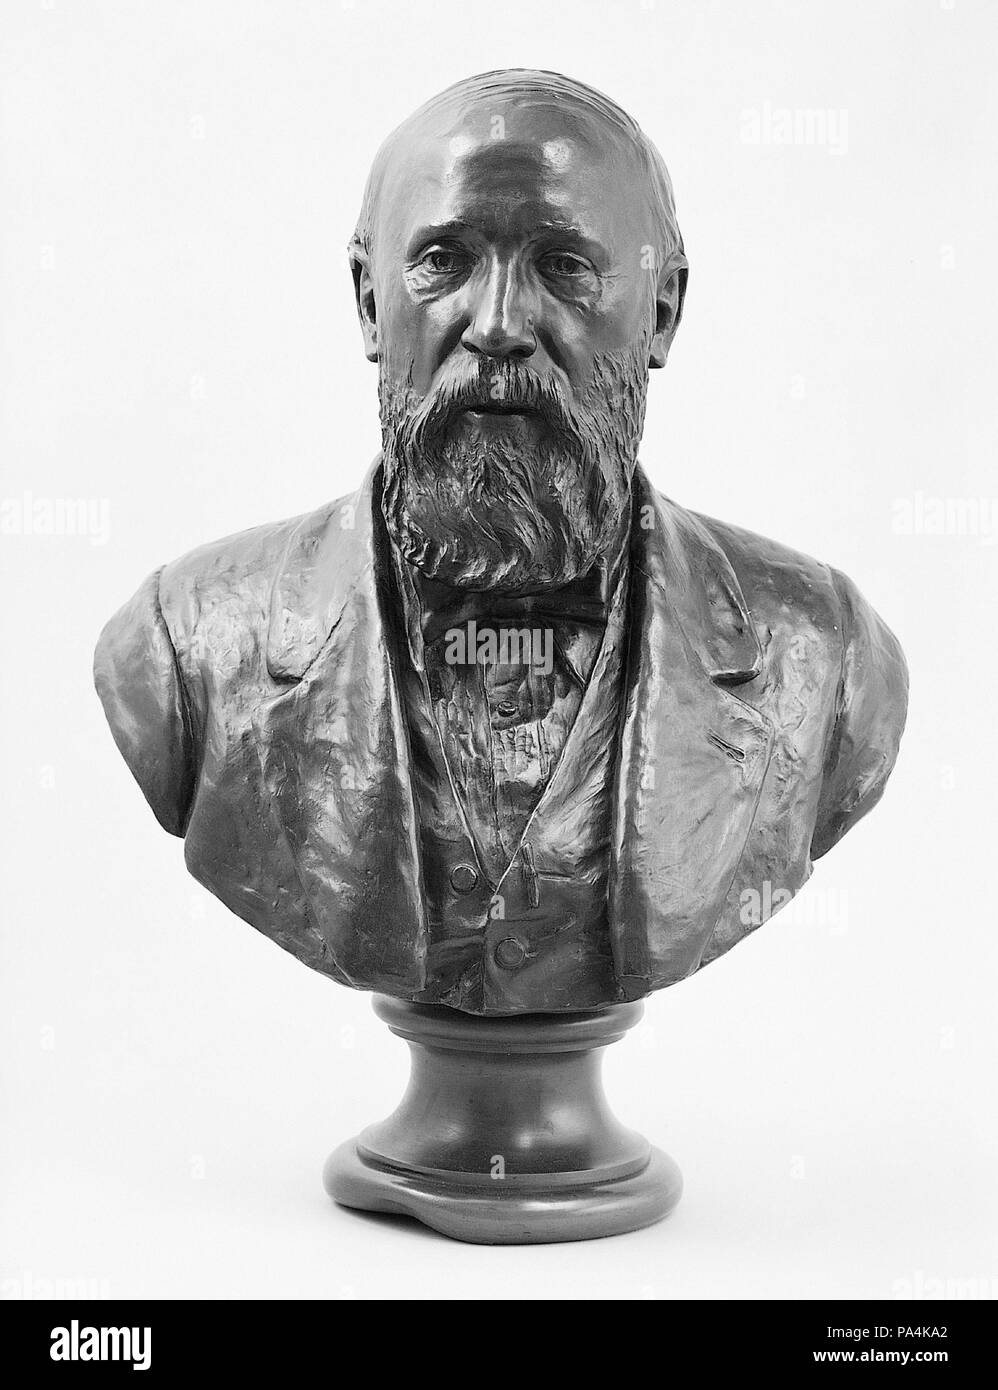 Auguste Pottier. Artist: Louis Amateis (1855-1913). Dimensions: 26 x 19 x 11 in. (66 x 48.3 x 27.9 cm). Date: 1884.  This portrait bust of Auguste Pottier (1823-1896) was no doubt one of Amateis's first efforts after he arrived in New York from his native Italy in 1883. Although it is uncertain how artist and sitter met, both were involved with work for city architectural firms, Amateis doing architectural sculpture and Pottier interior furnishings. Born in France, Pottier established a successful career as a decorator and designer of furniture. Forming a partnership in 1859 with William P. St Stock Photo